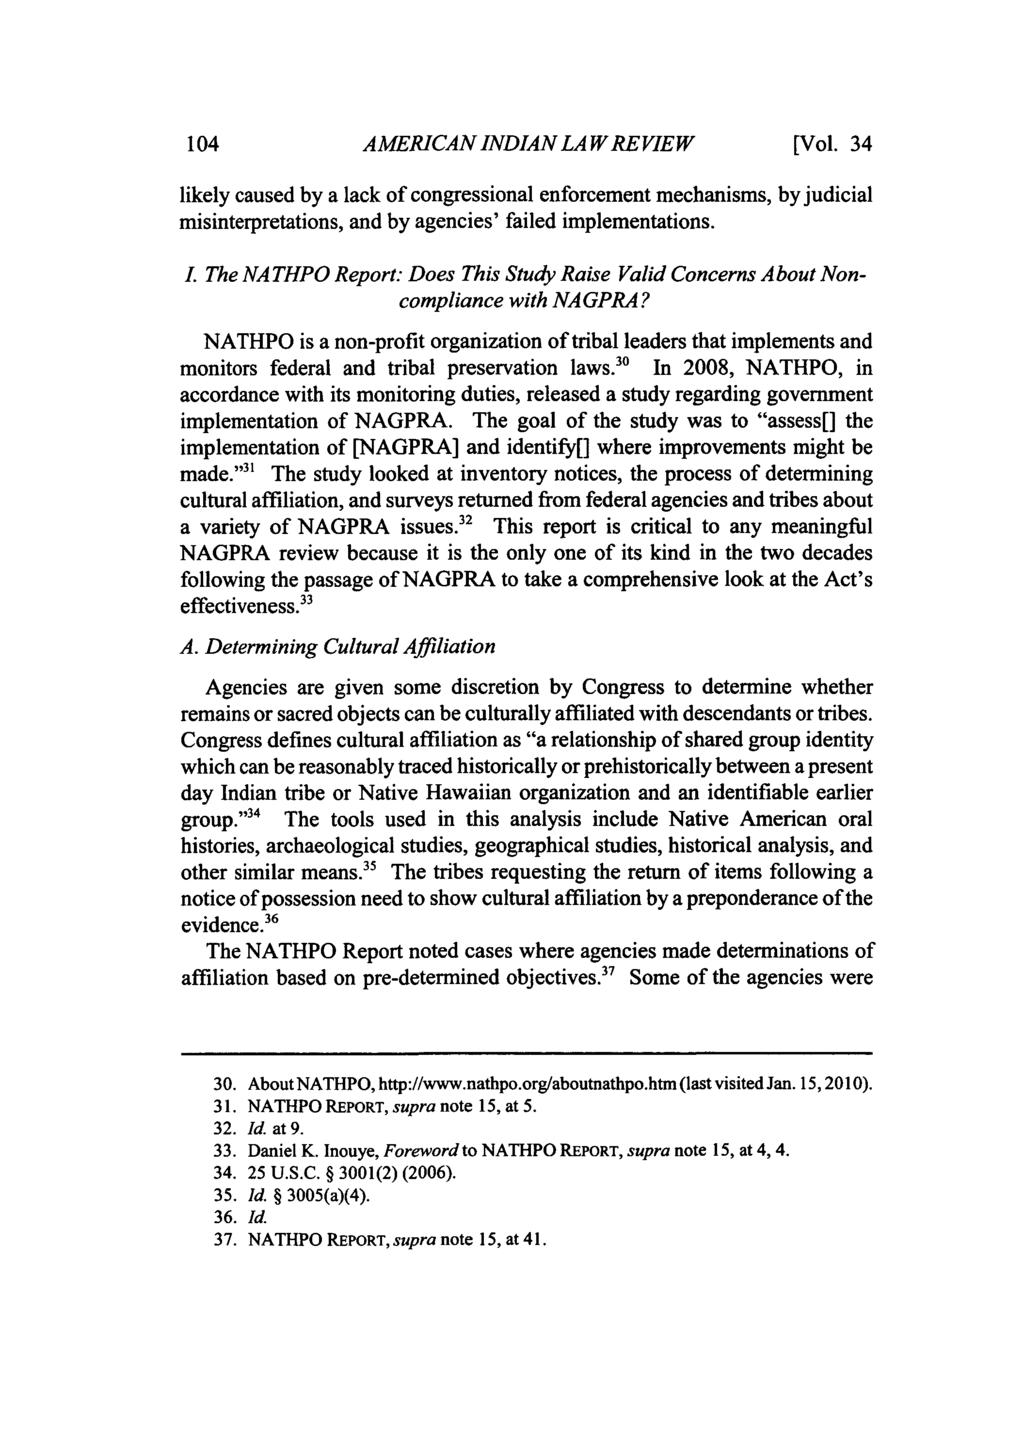 104 AMERICAN INDIAN LA WREVIEW [Vol. 34 likely caused by a lack of congressional enforcement mechanisms, by judicial misinterpretations, and by agencies' failed implementations. I. The NATHPO Report: Does This Study Raise Valid Concerns About Noncompliance with NAGPRA?